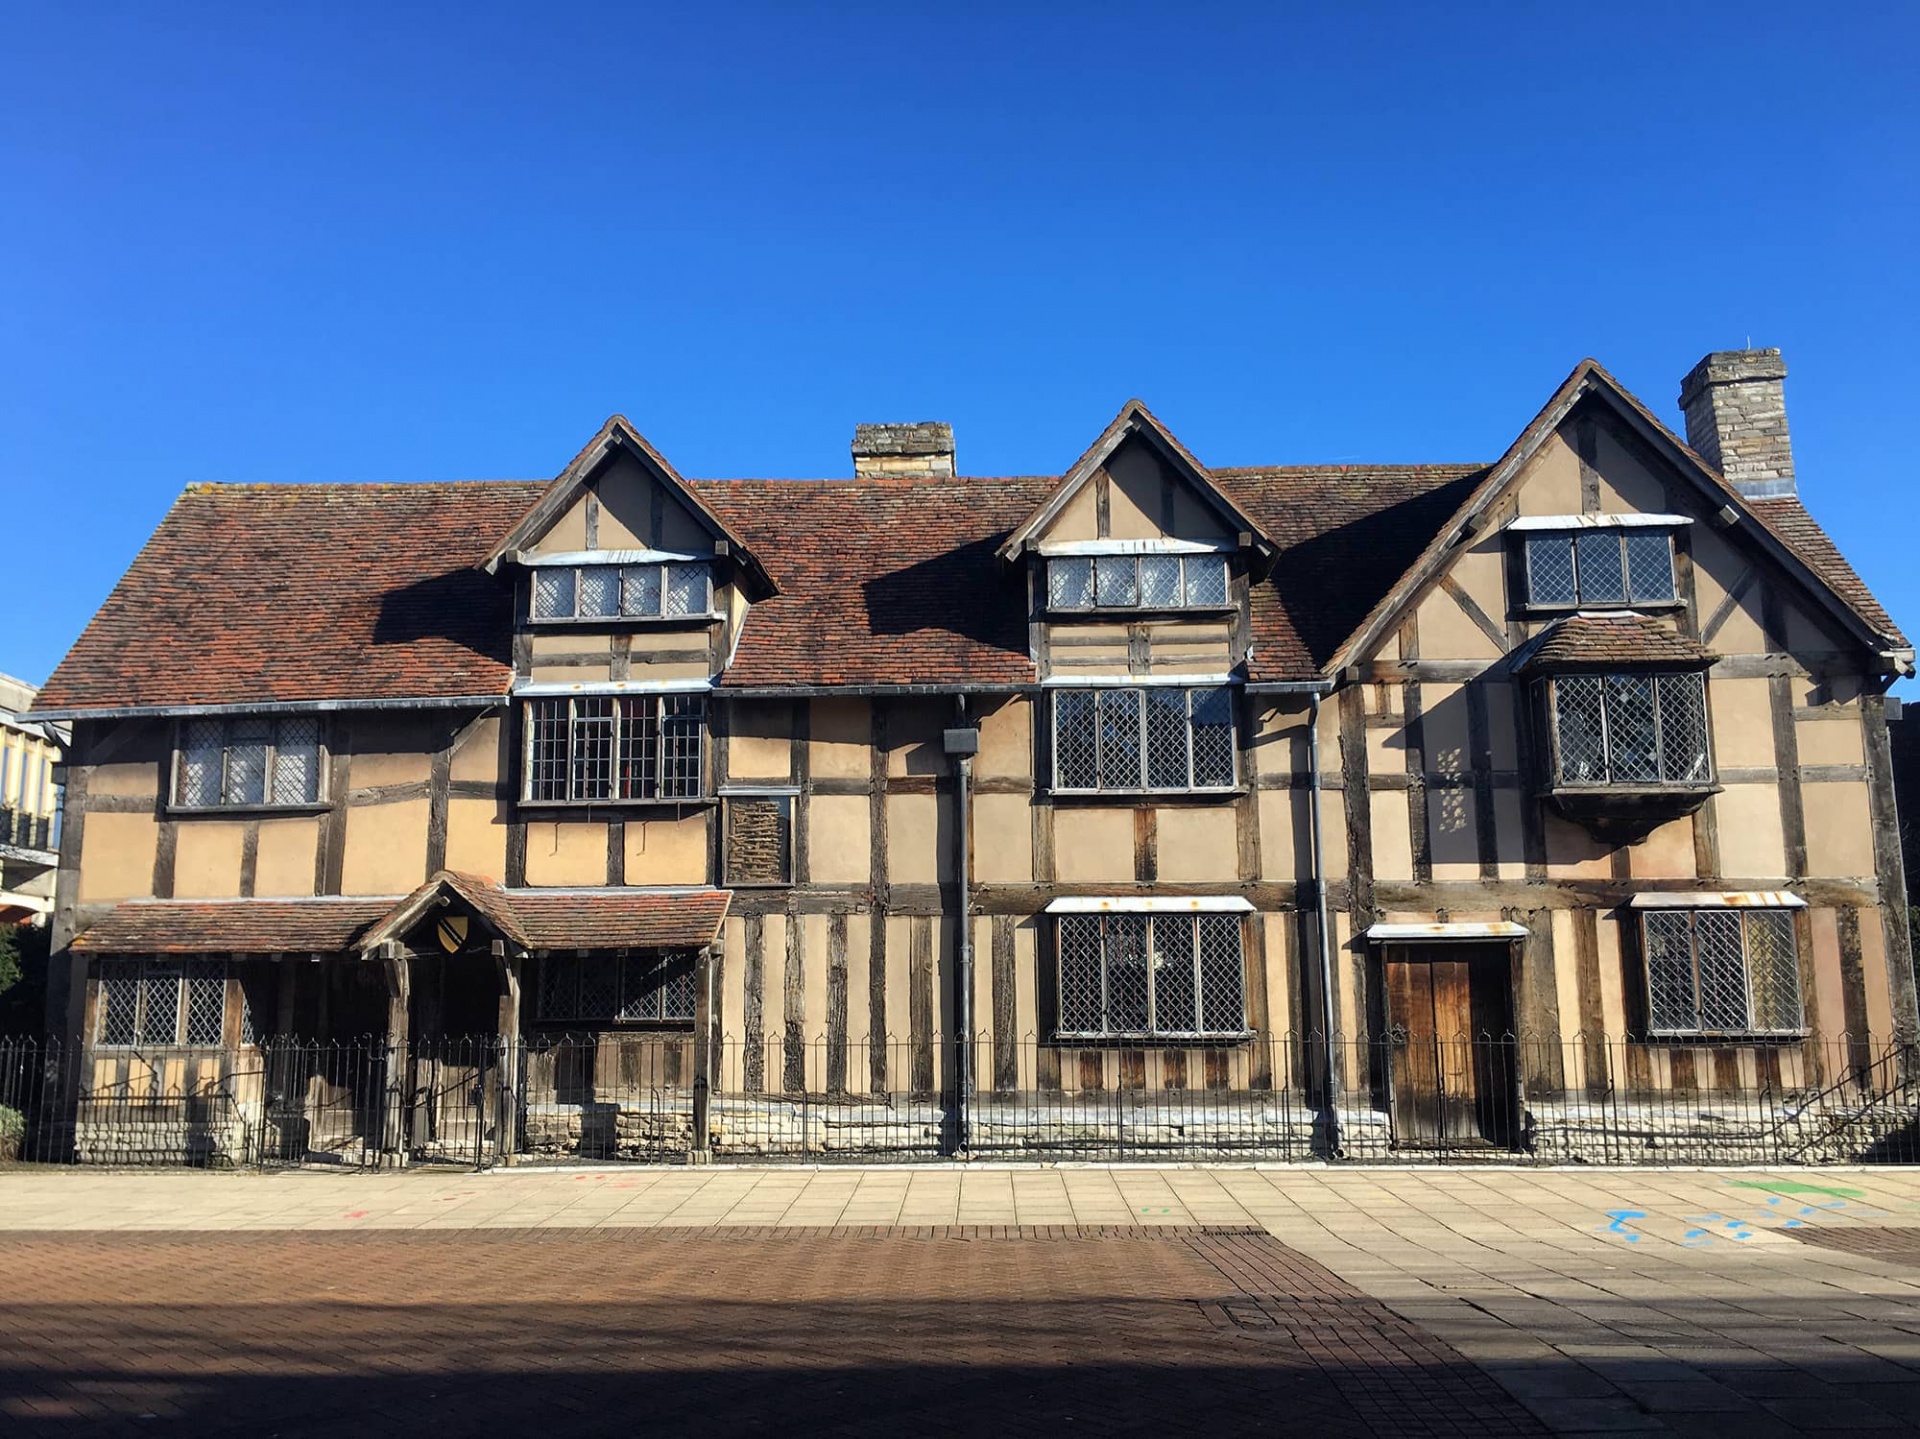 Shakespeare's birthplace, exterior